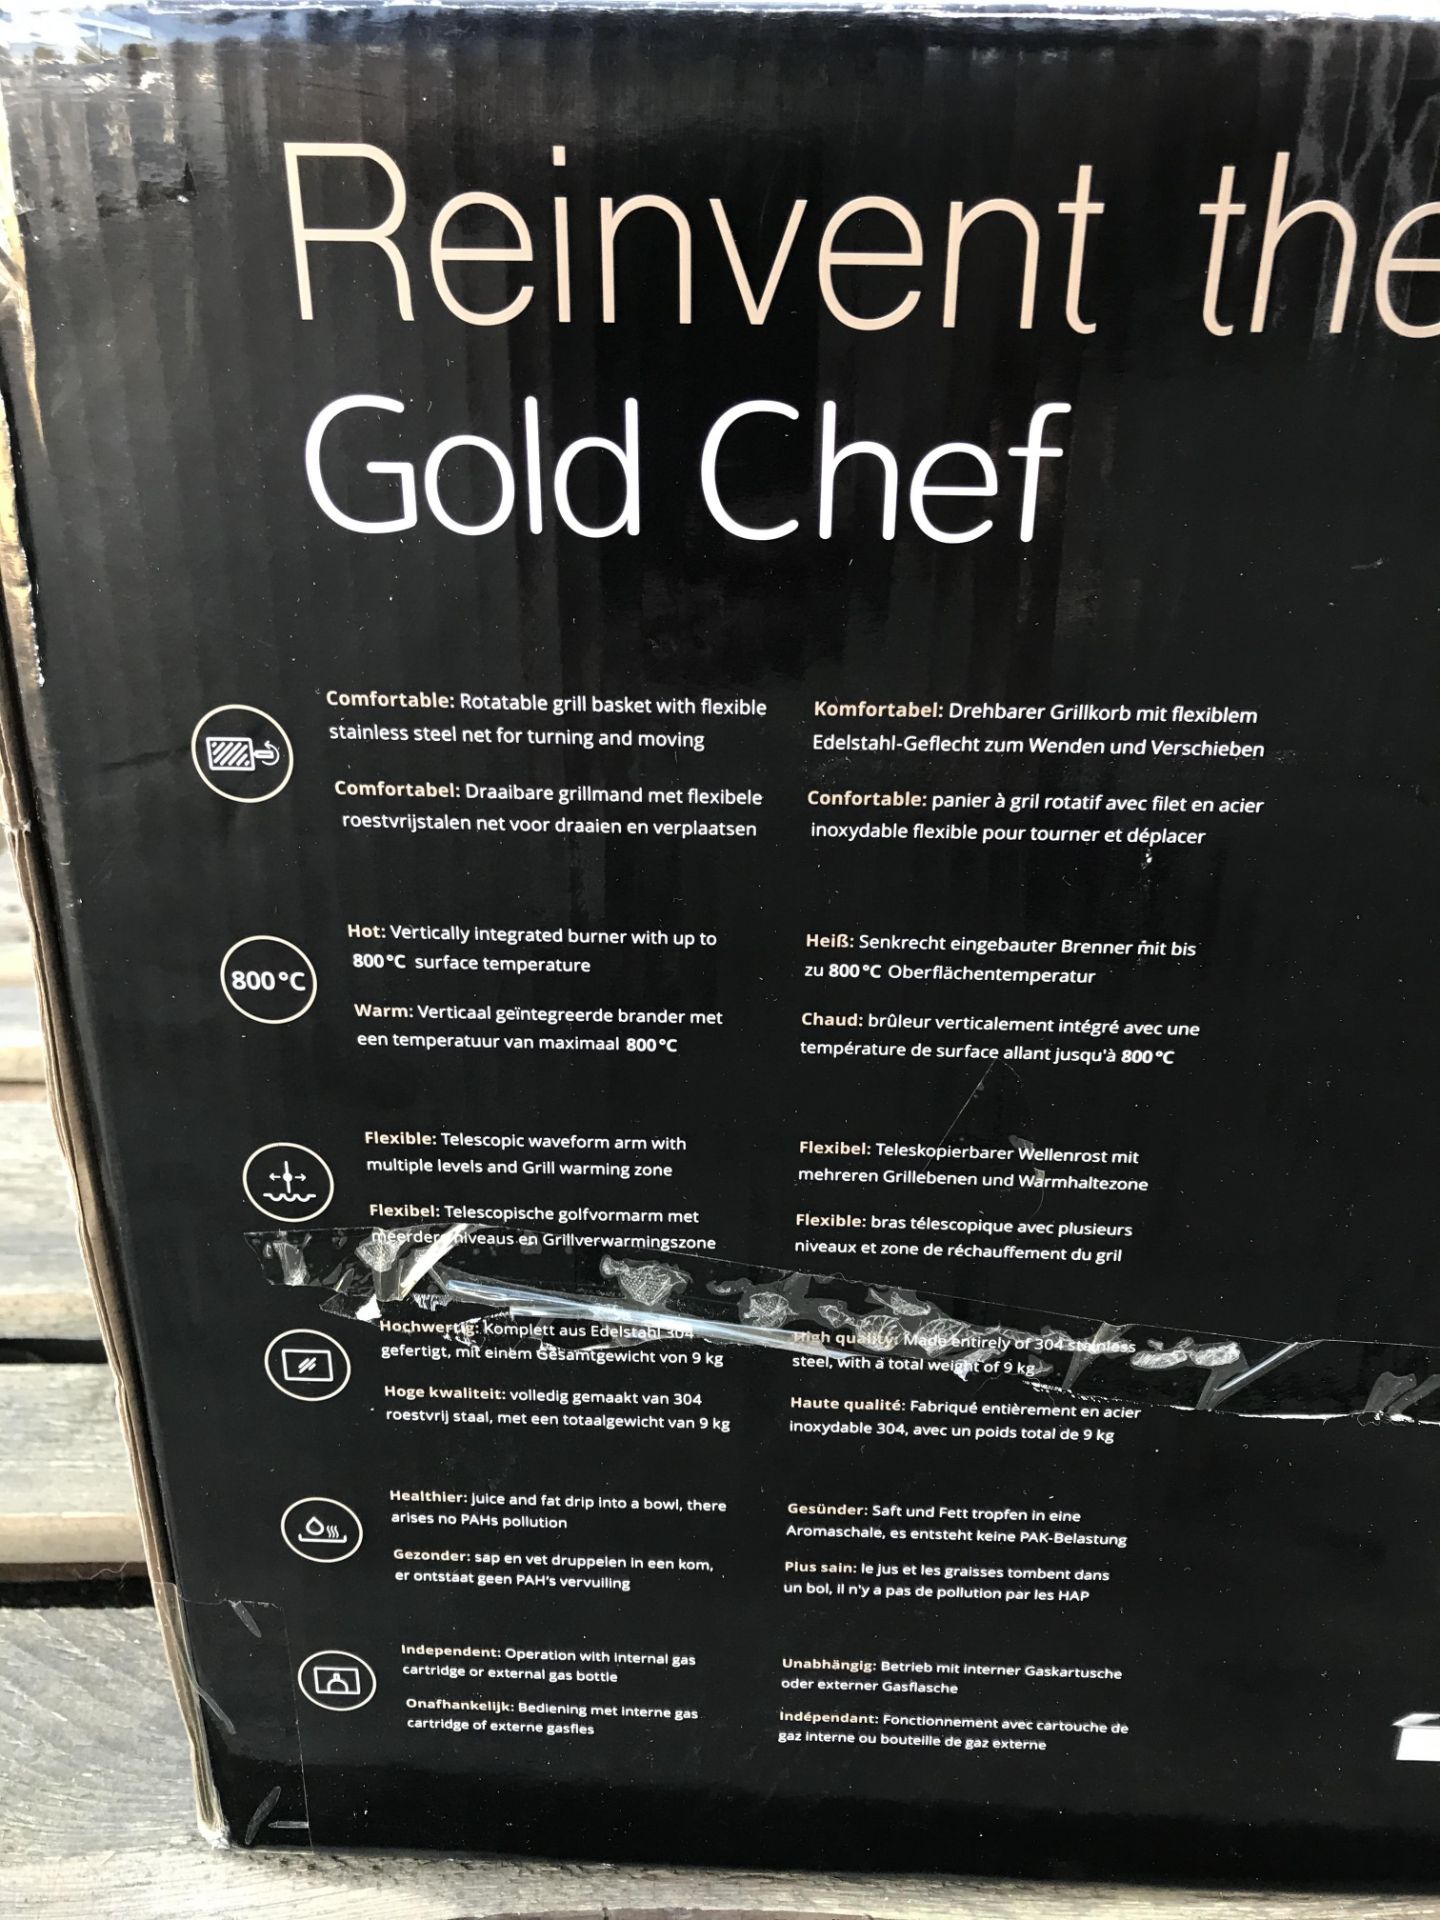 GOLD CHEF TWO 800C ROTISSERIE GRILL - Image 4 of 6